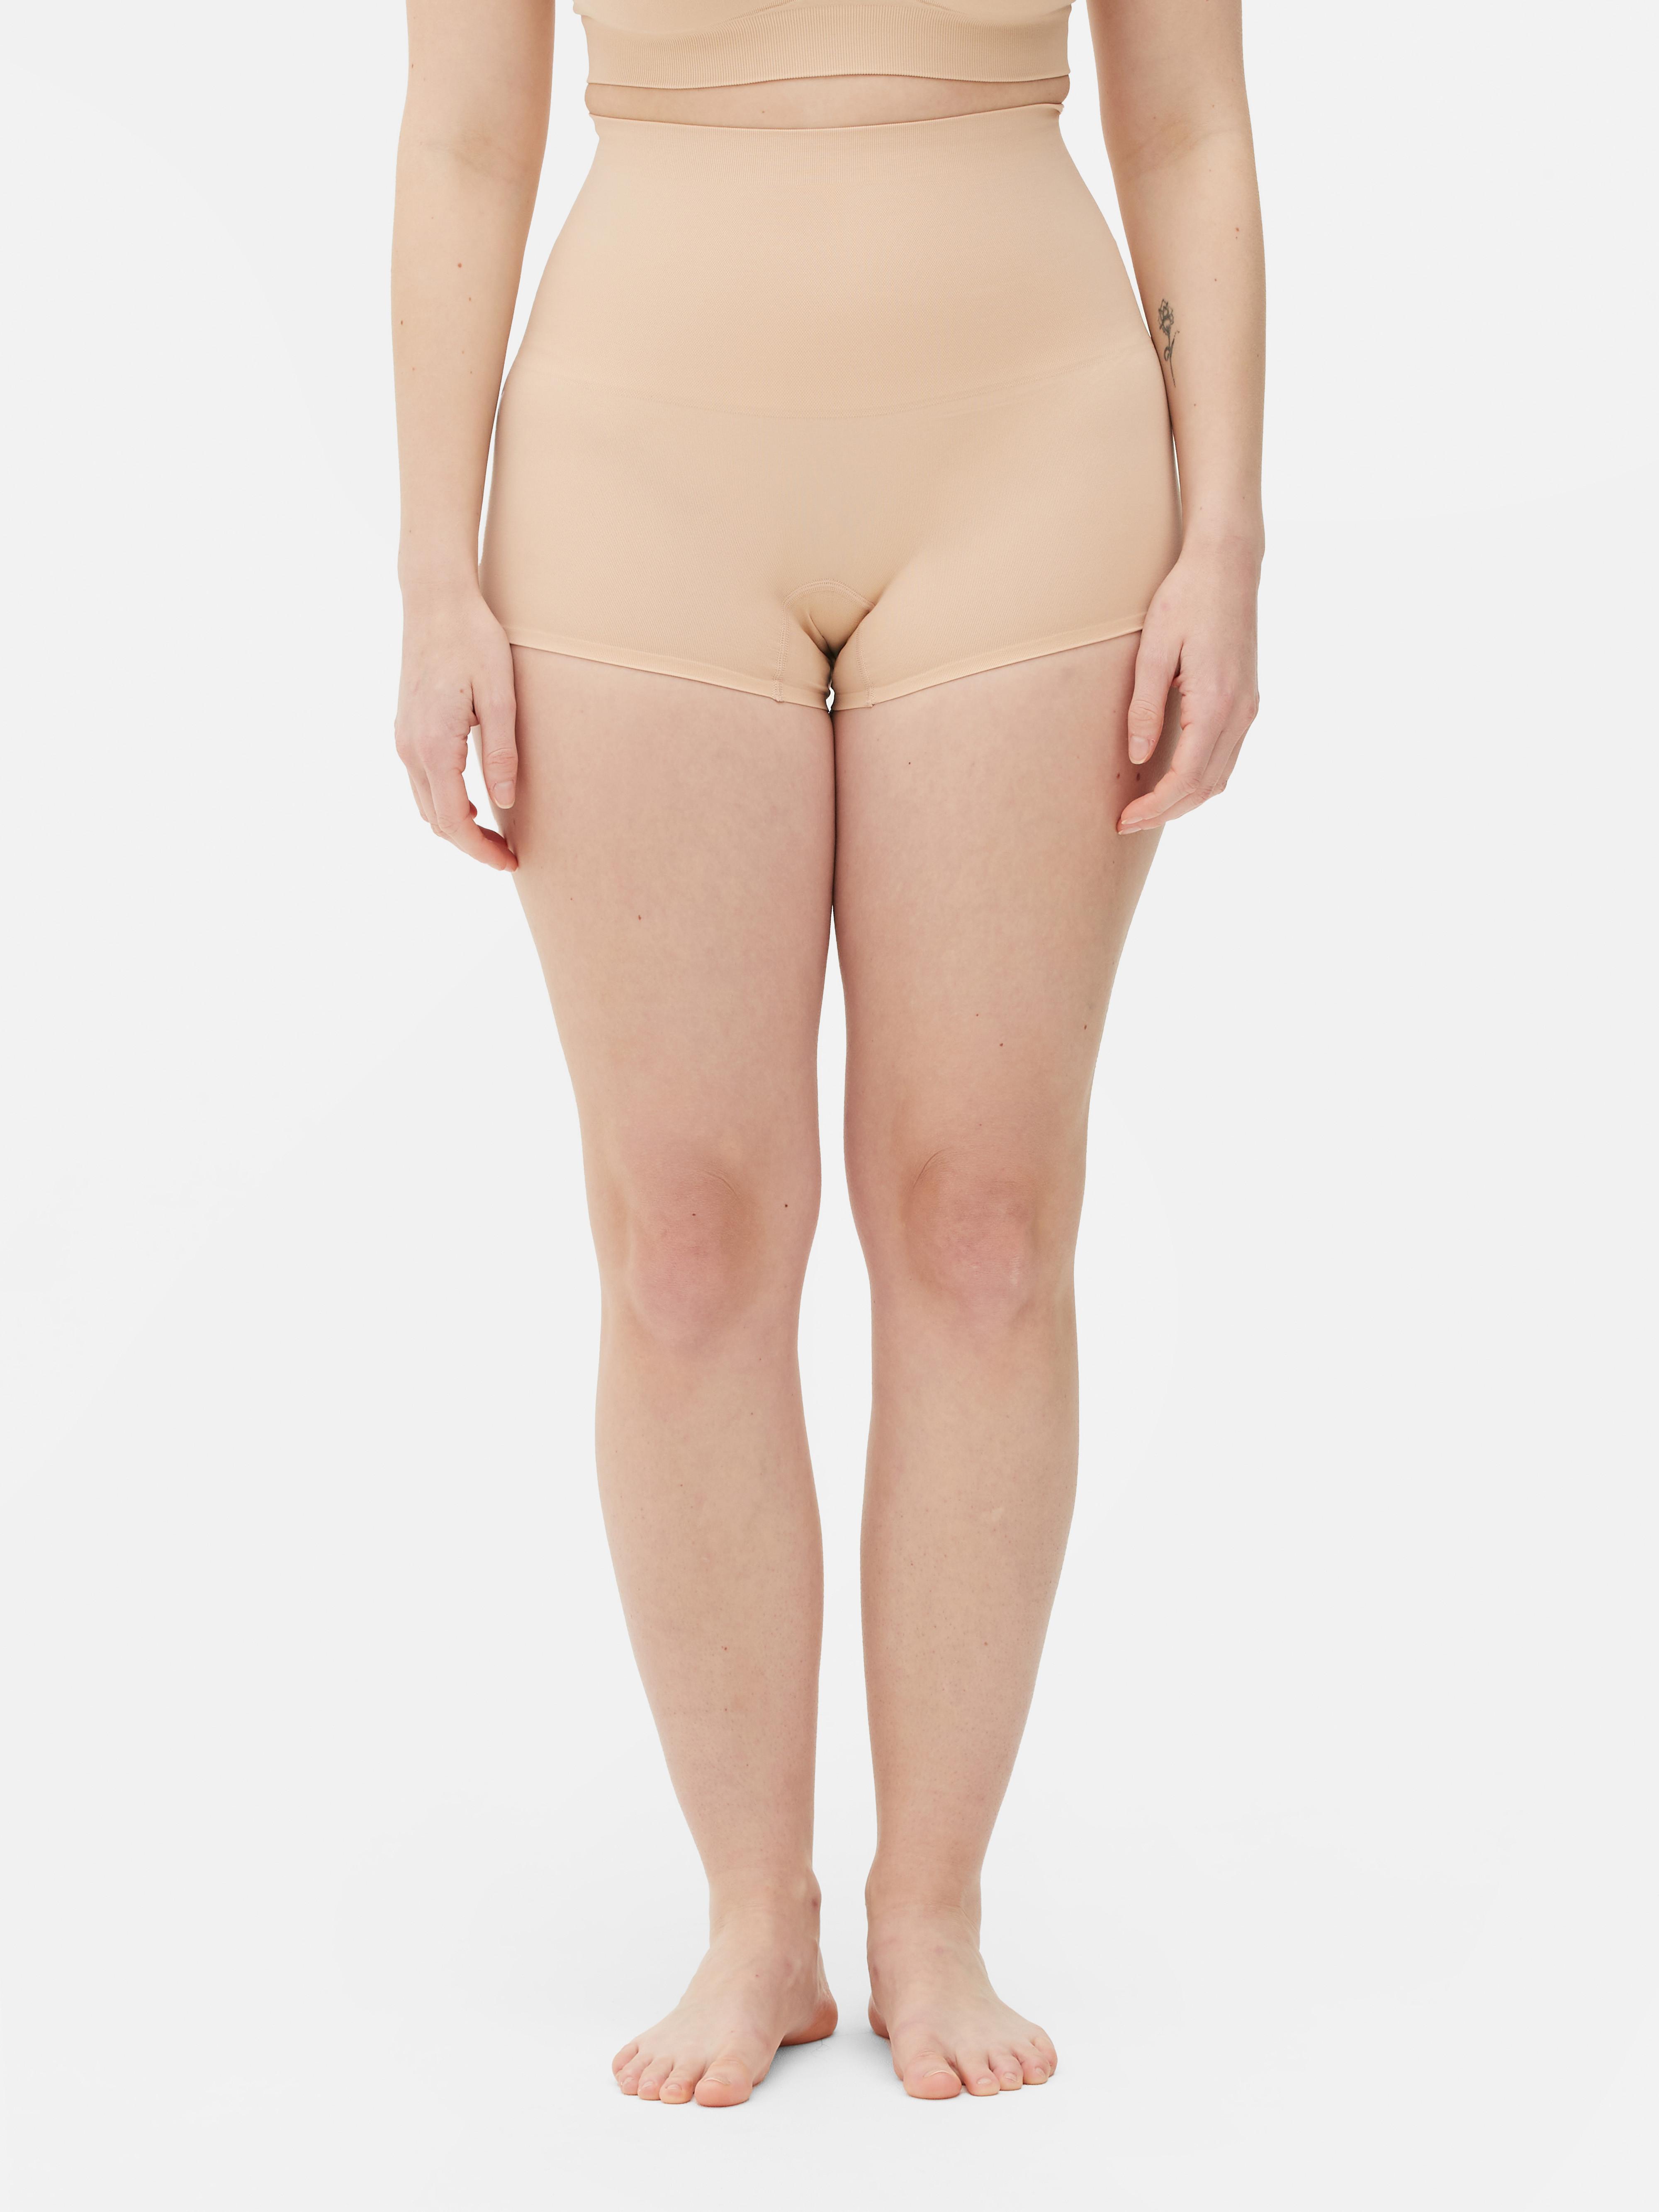 I tried a pair of £12 Primark shapewear shorts, the support is epic, they  smooth all my lumps and rival my fave M&S ones